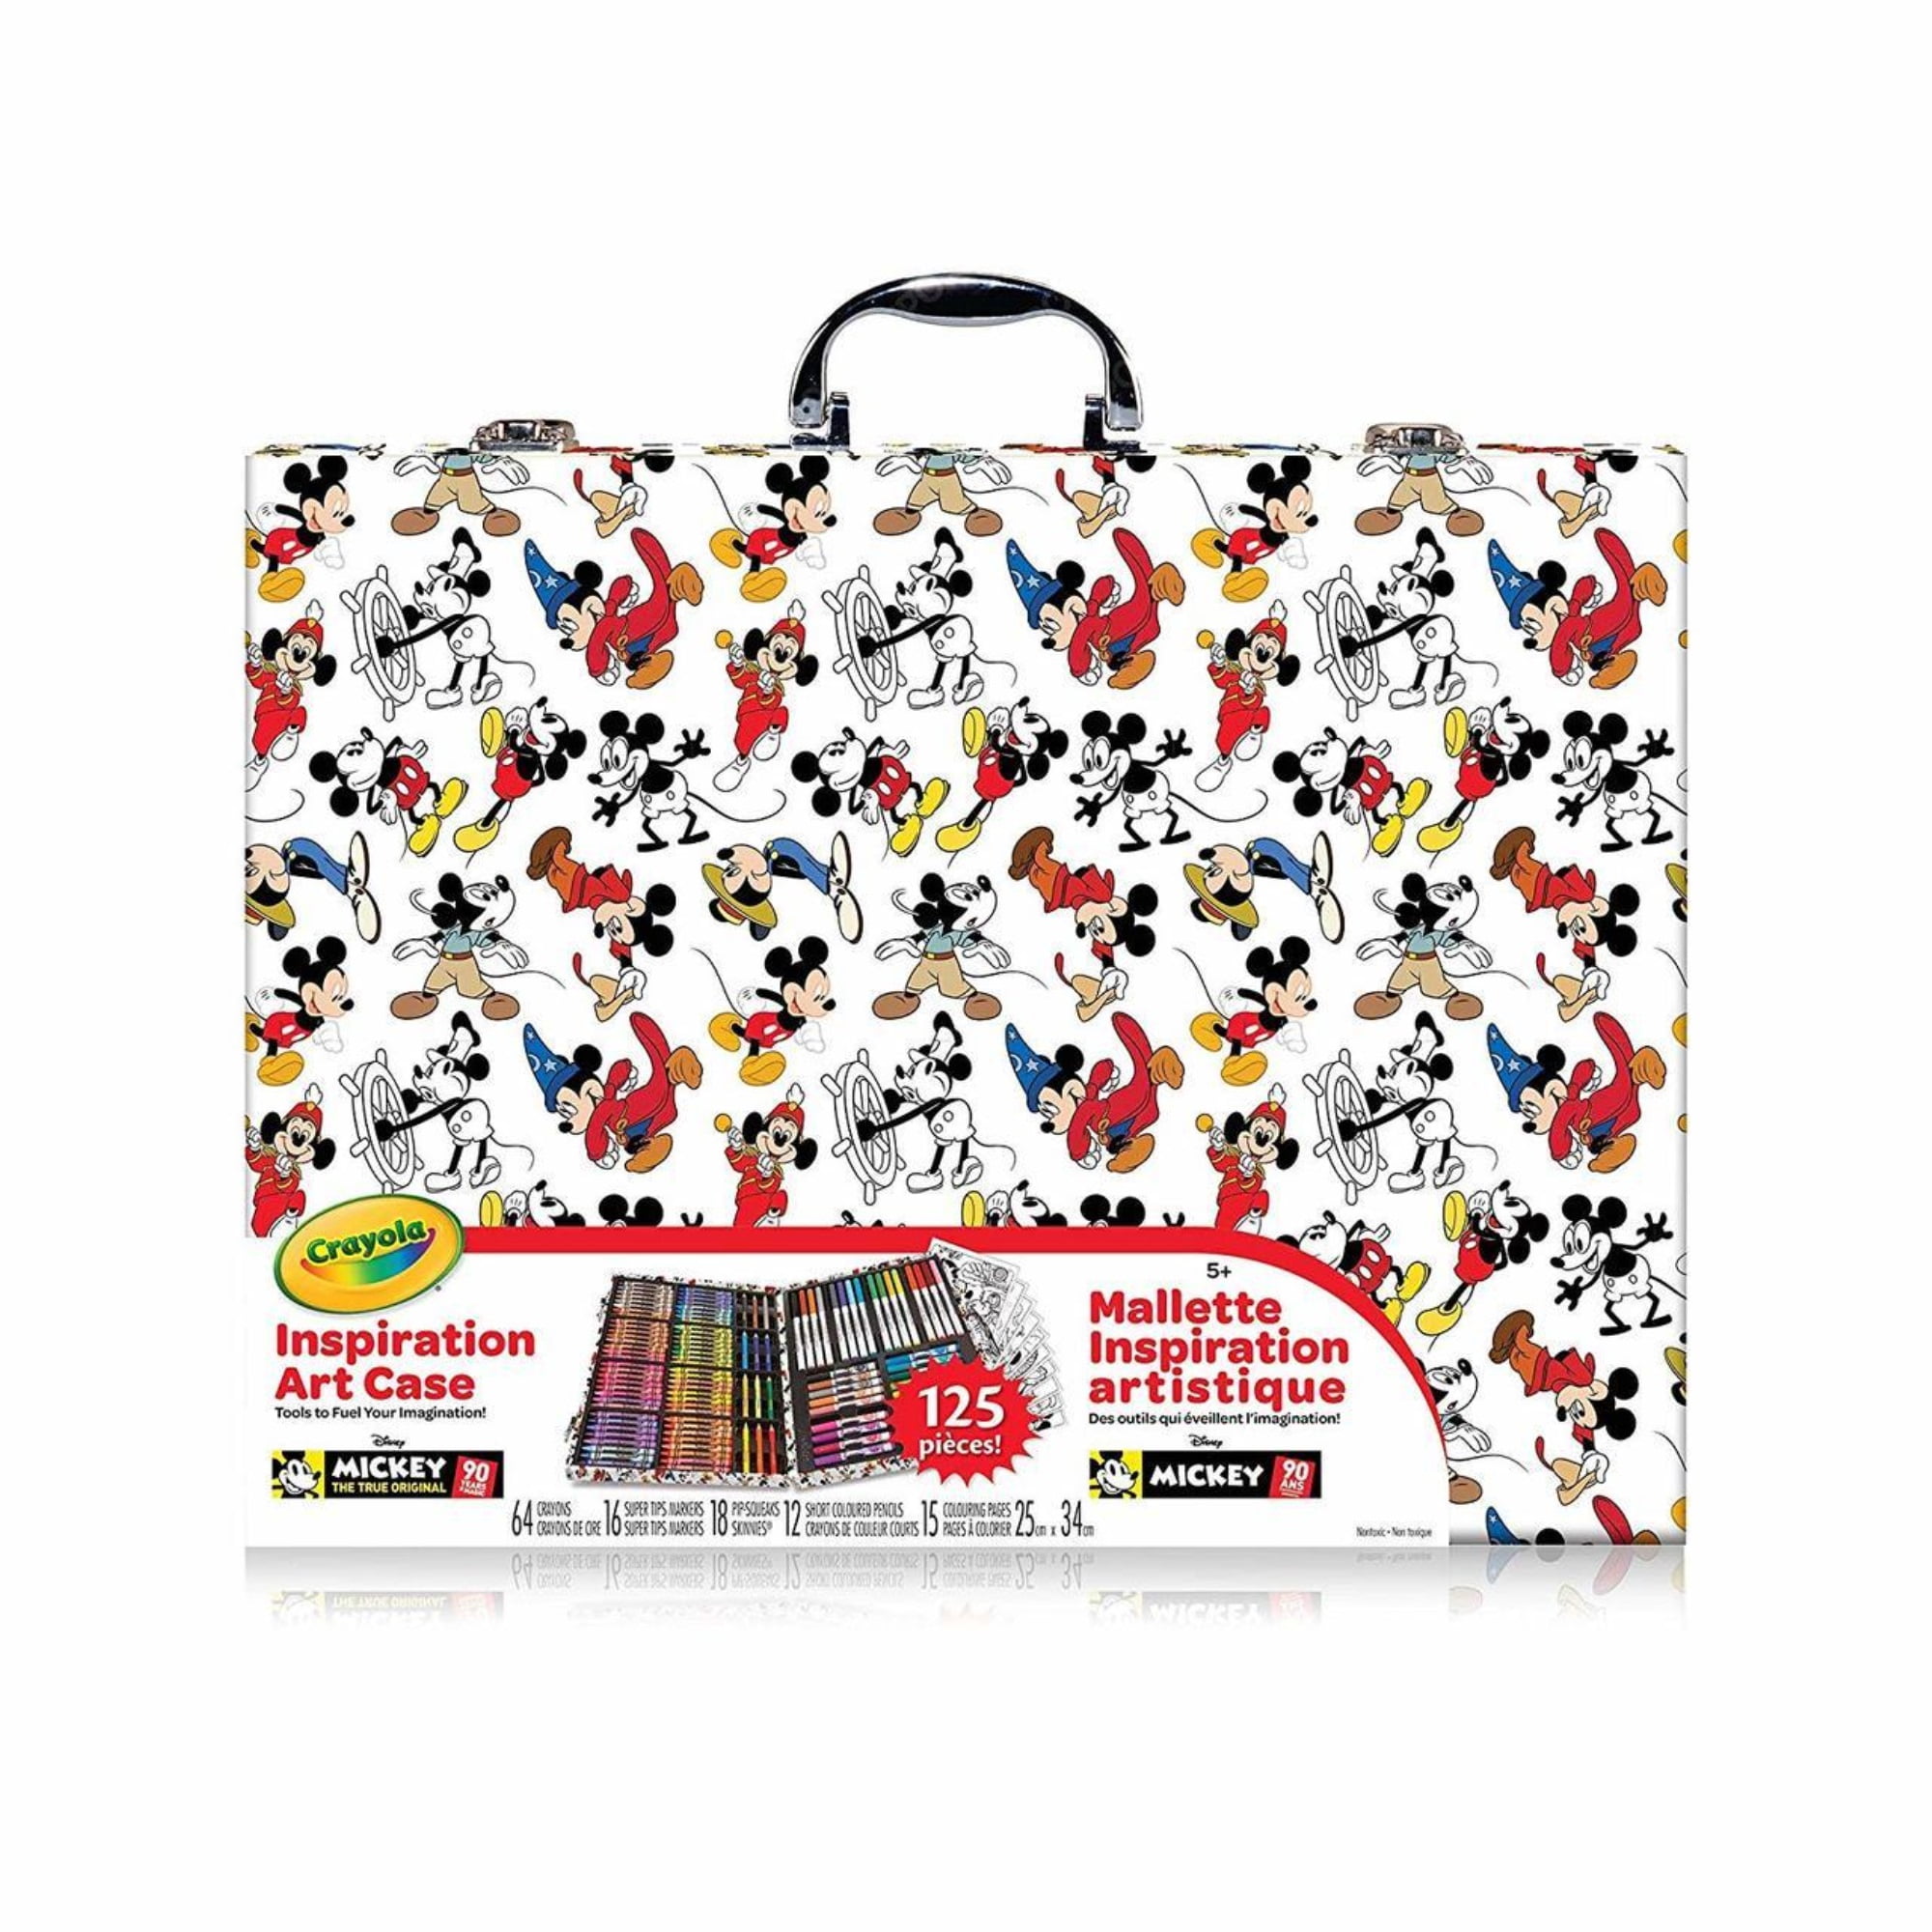 Art Case Over 140 Pieces At Home Or On The Go, Compartmentalized Tray Holds  Crayons, Colored pencils, and markers For creating Original Art